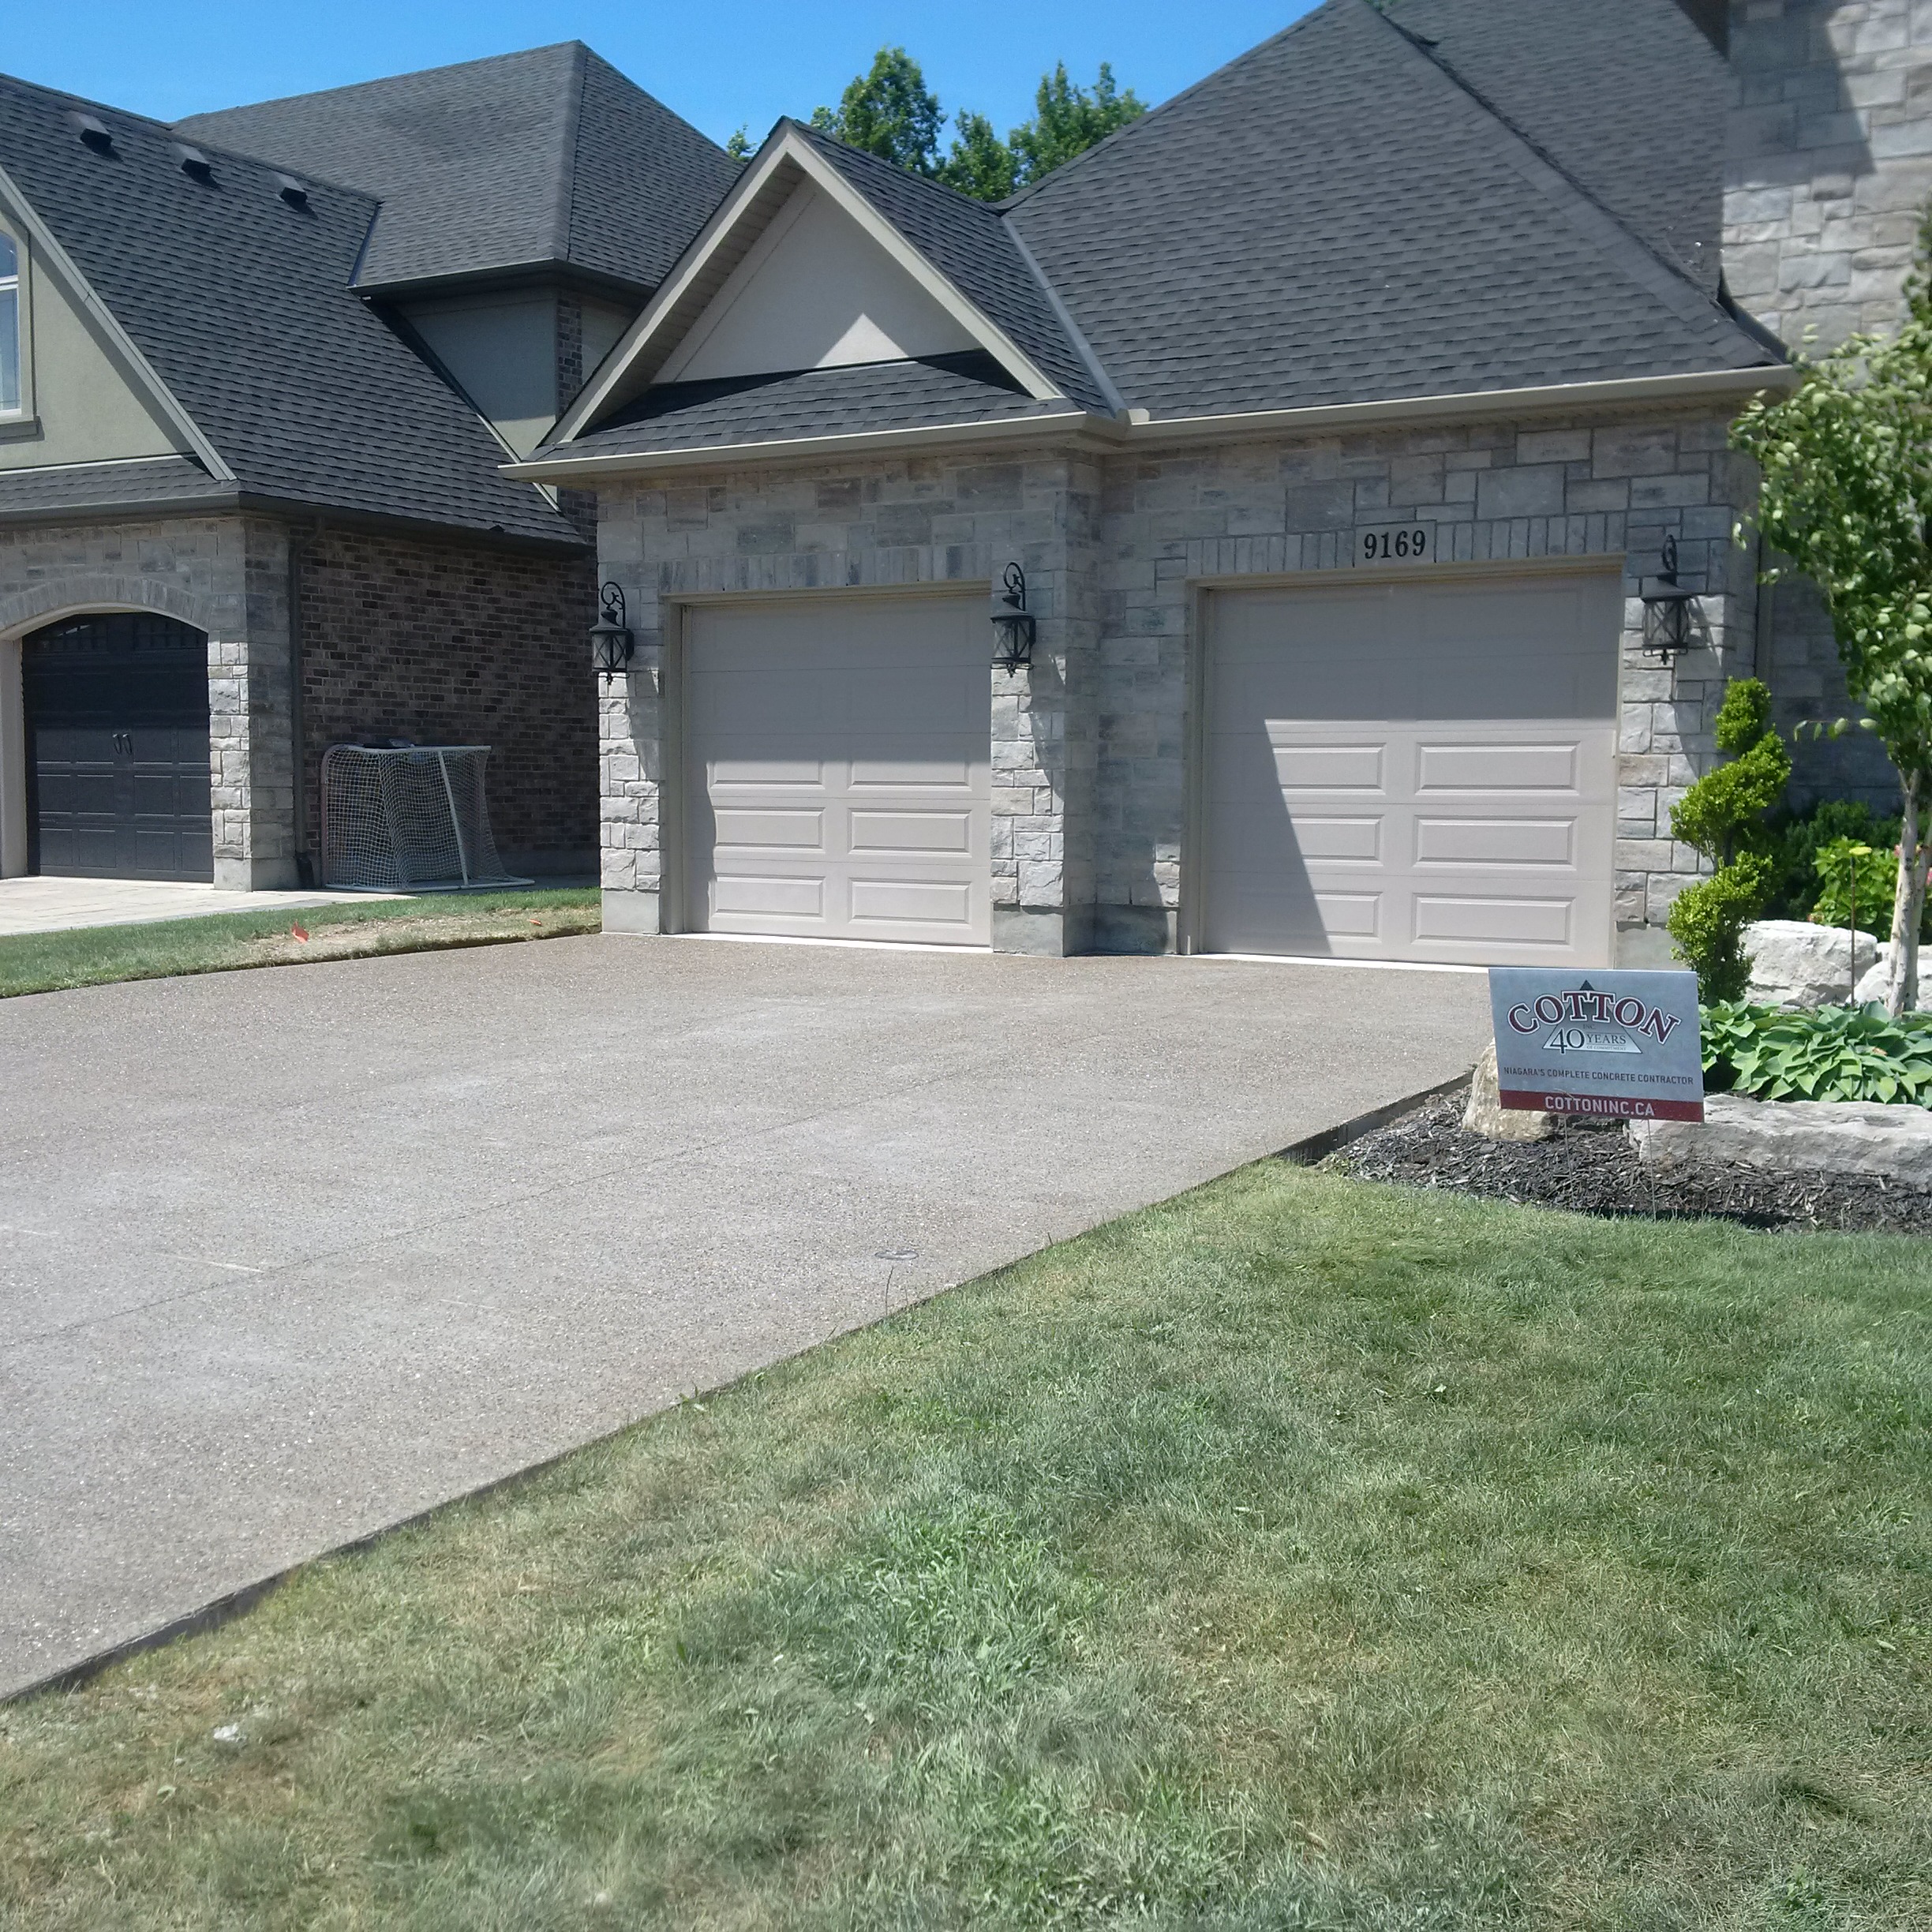 This photo shows a residential driveway and garage.